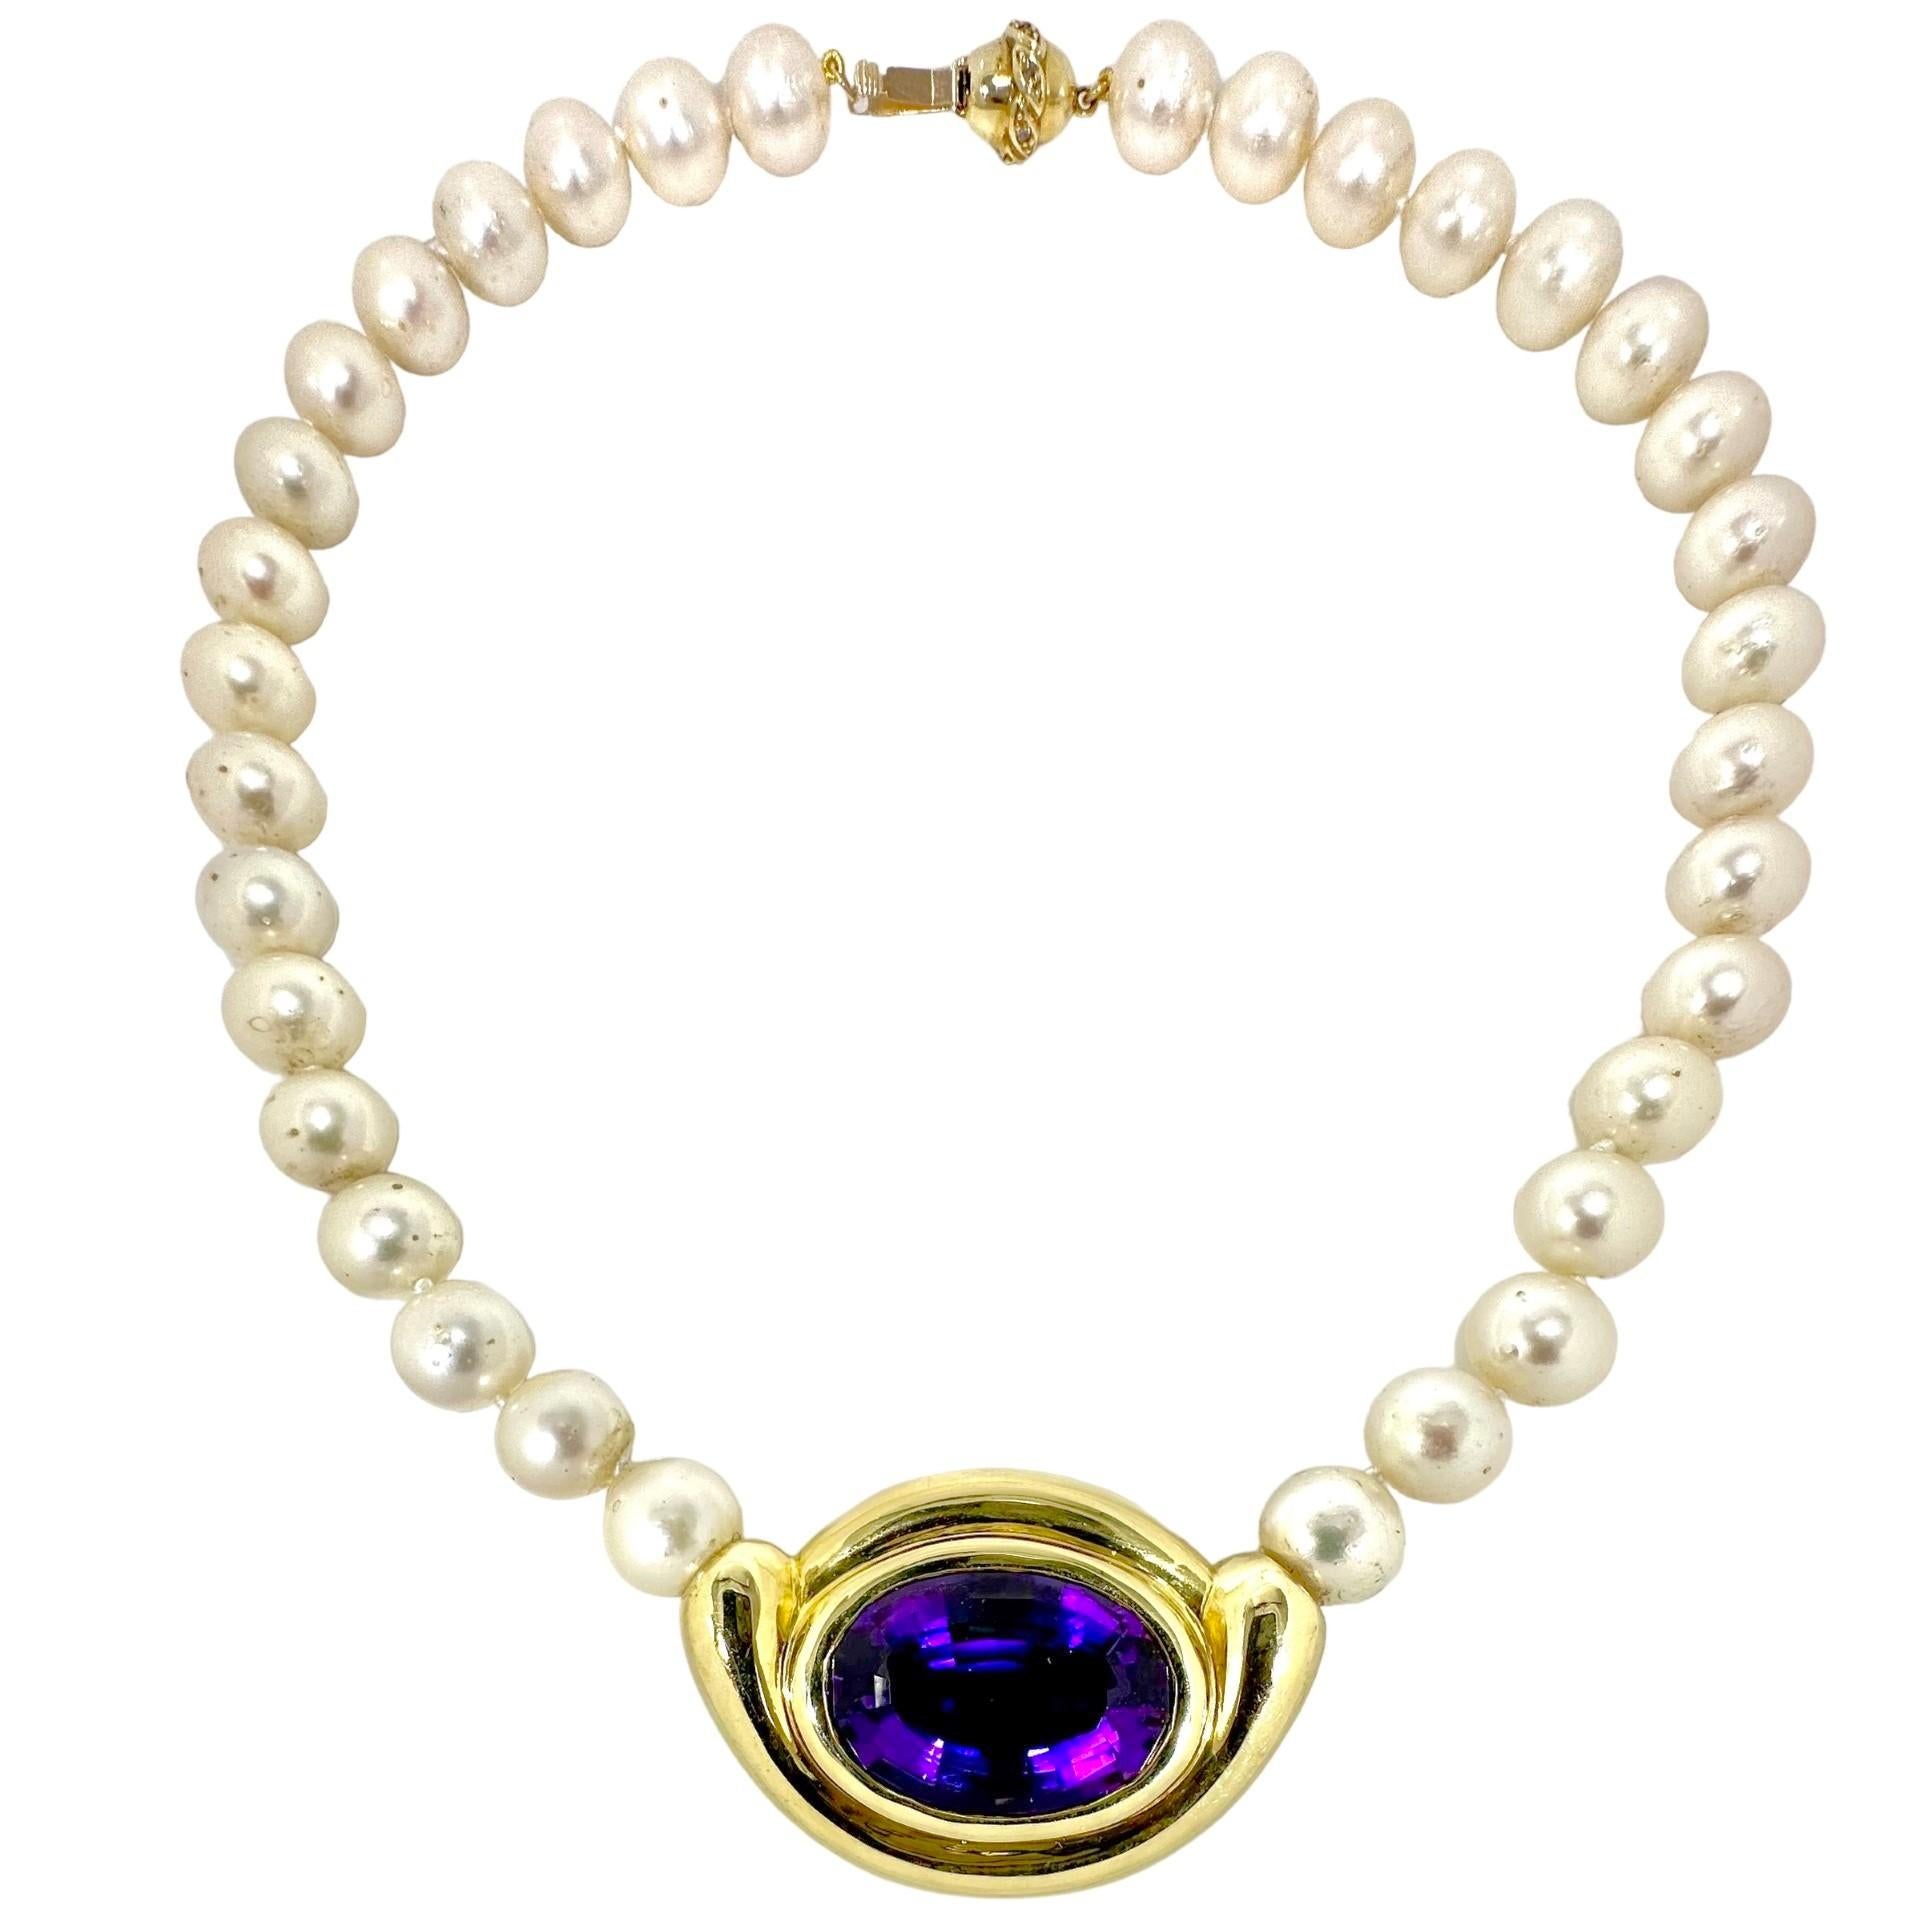 Timeless Vintage 18k Gold Modernist Necklace with Amethyst and Akoya Pearls For Sale